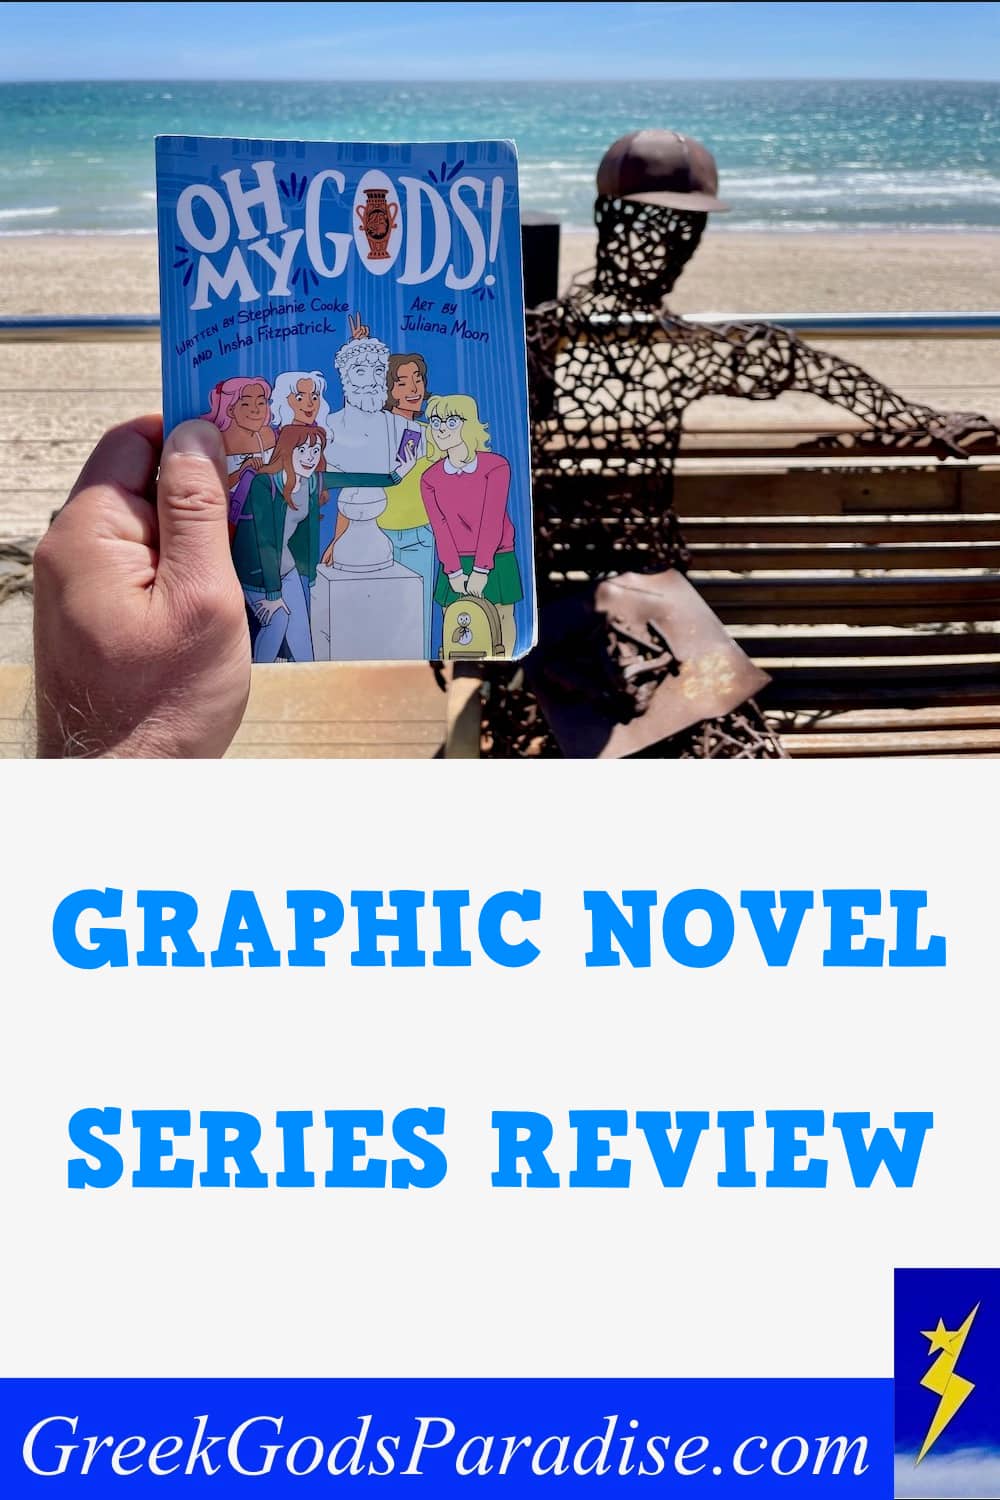 Oh My Gods Graphic Novel Series Review